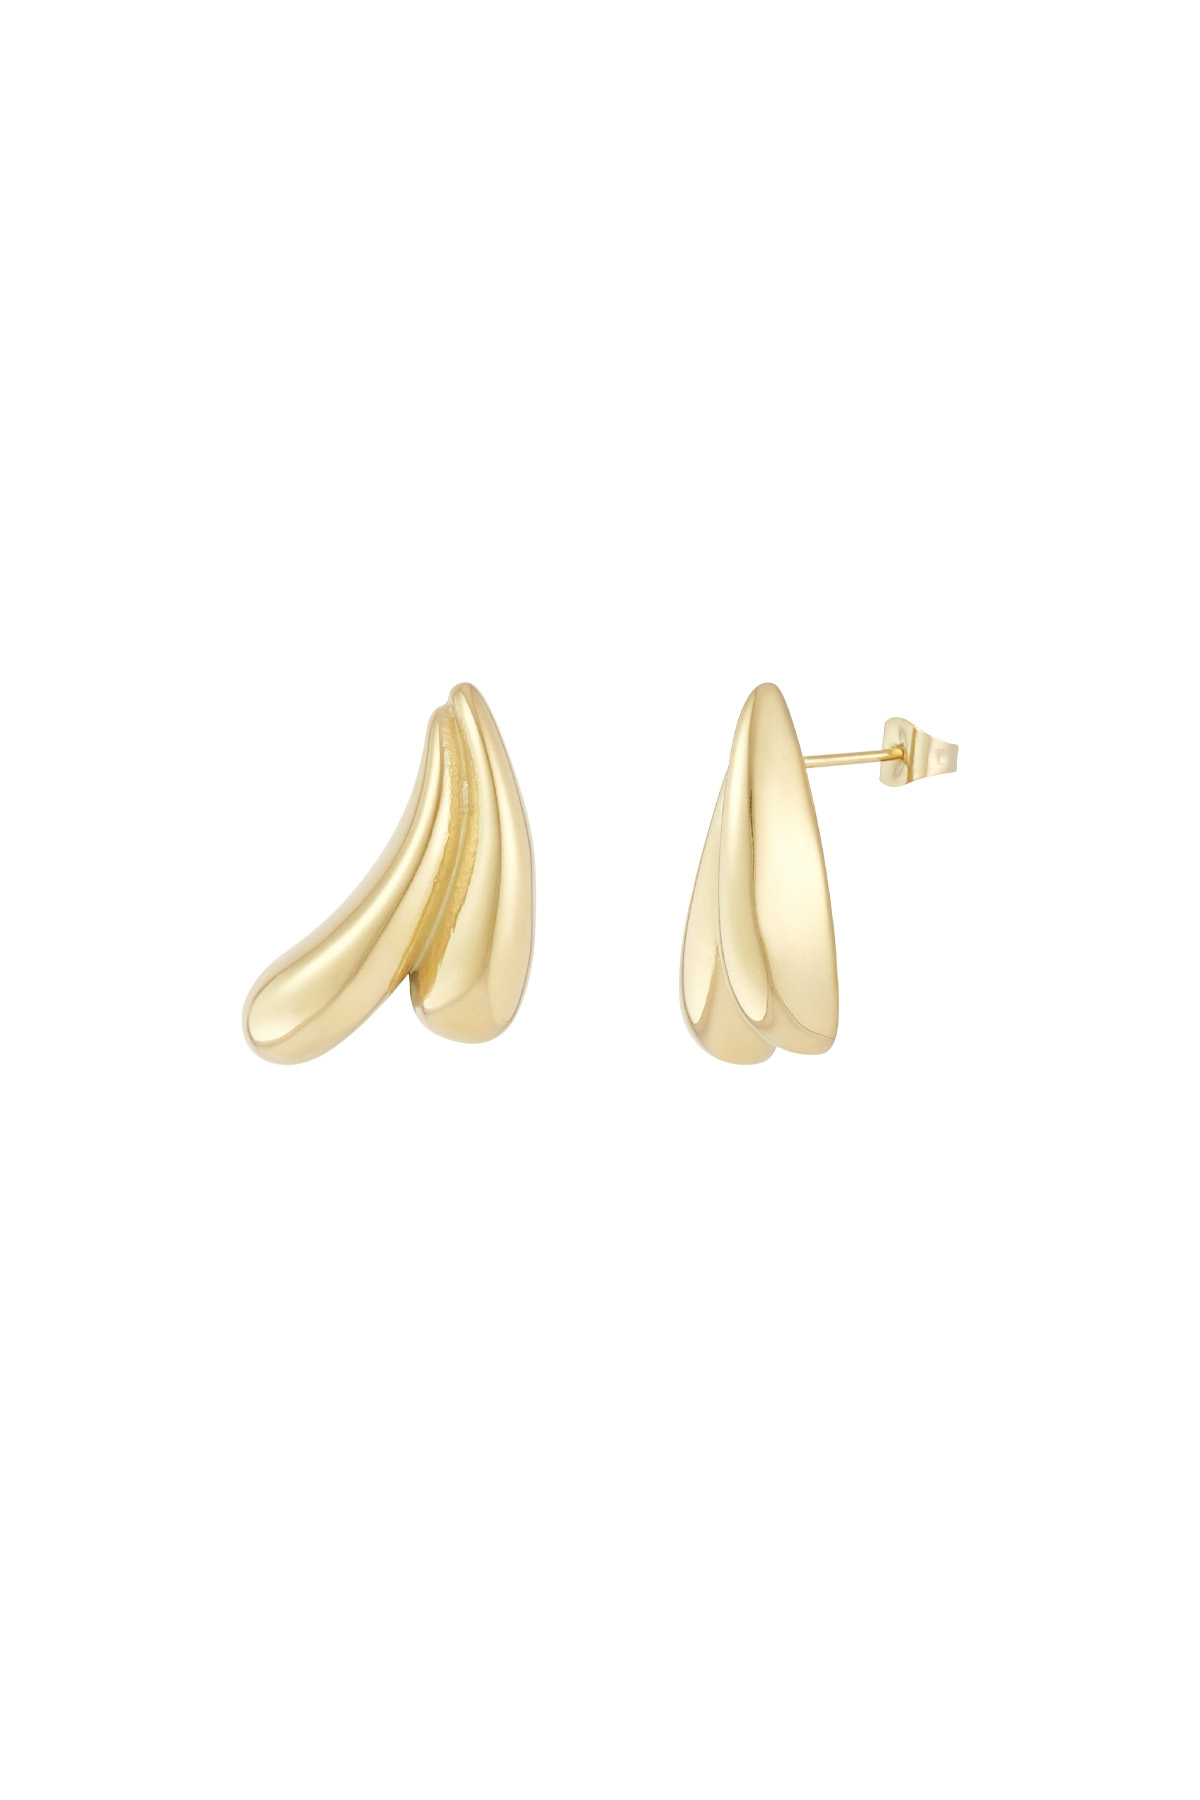 Earrings drippies - gold h5 